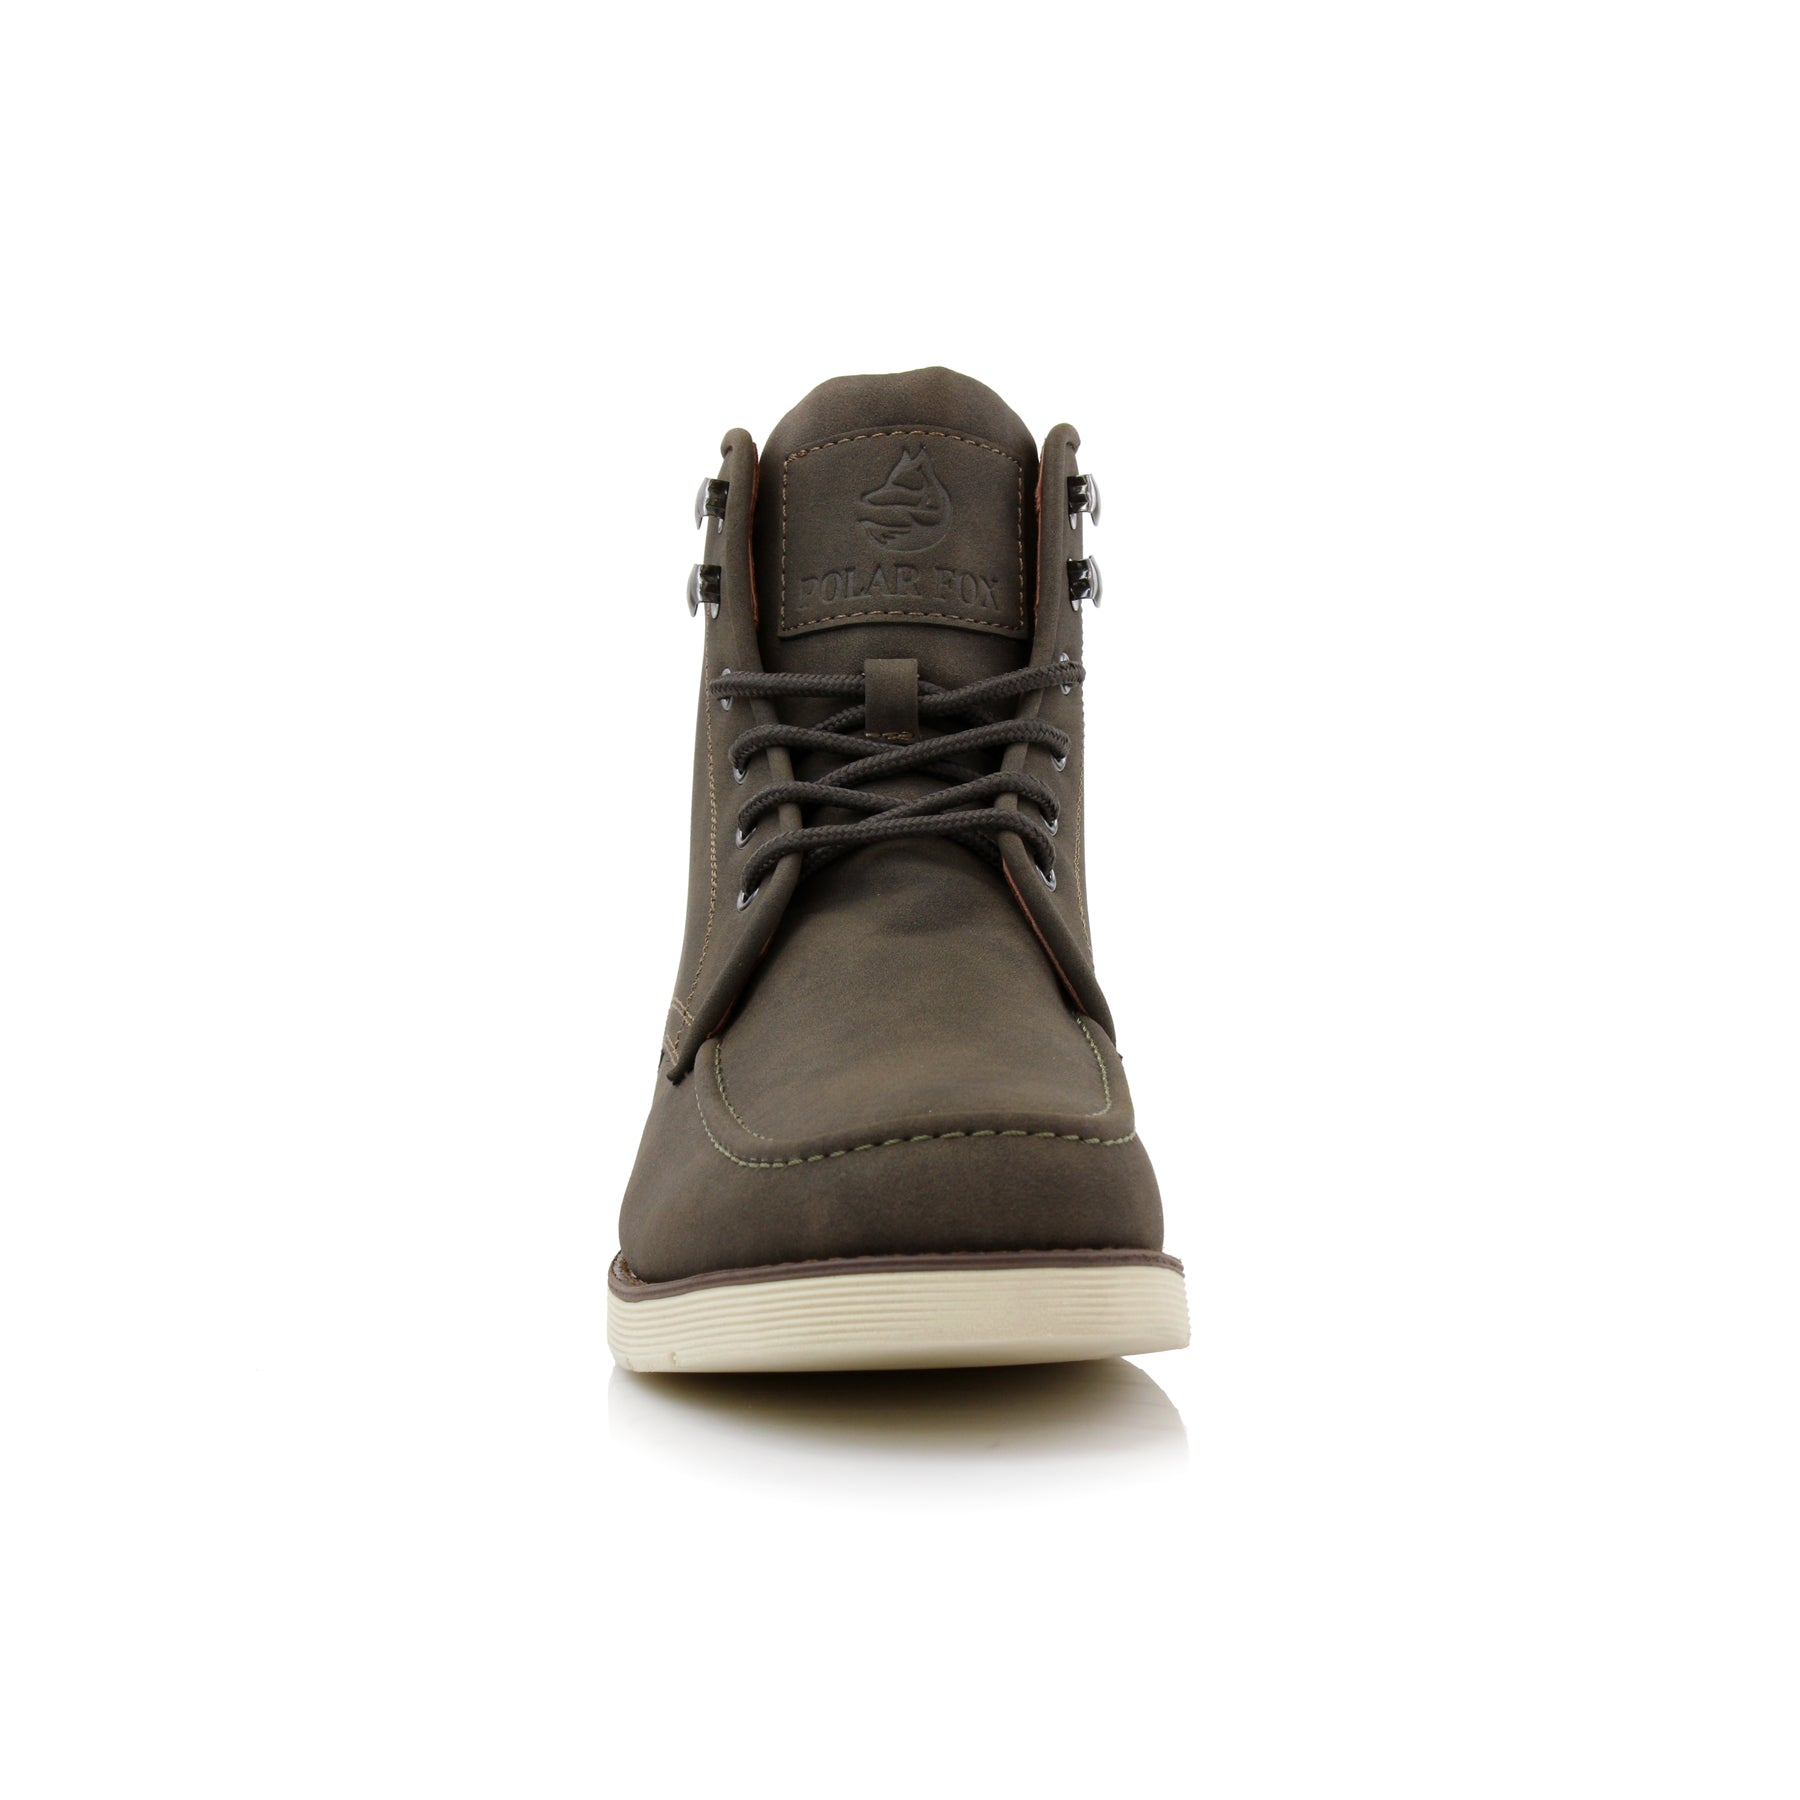 Moc-Toe High-Top Boots | Brixton by Polar Fox | Conal Footwear | Front Angle View